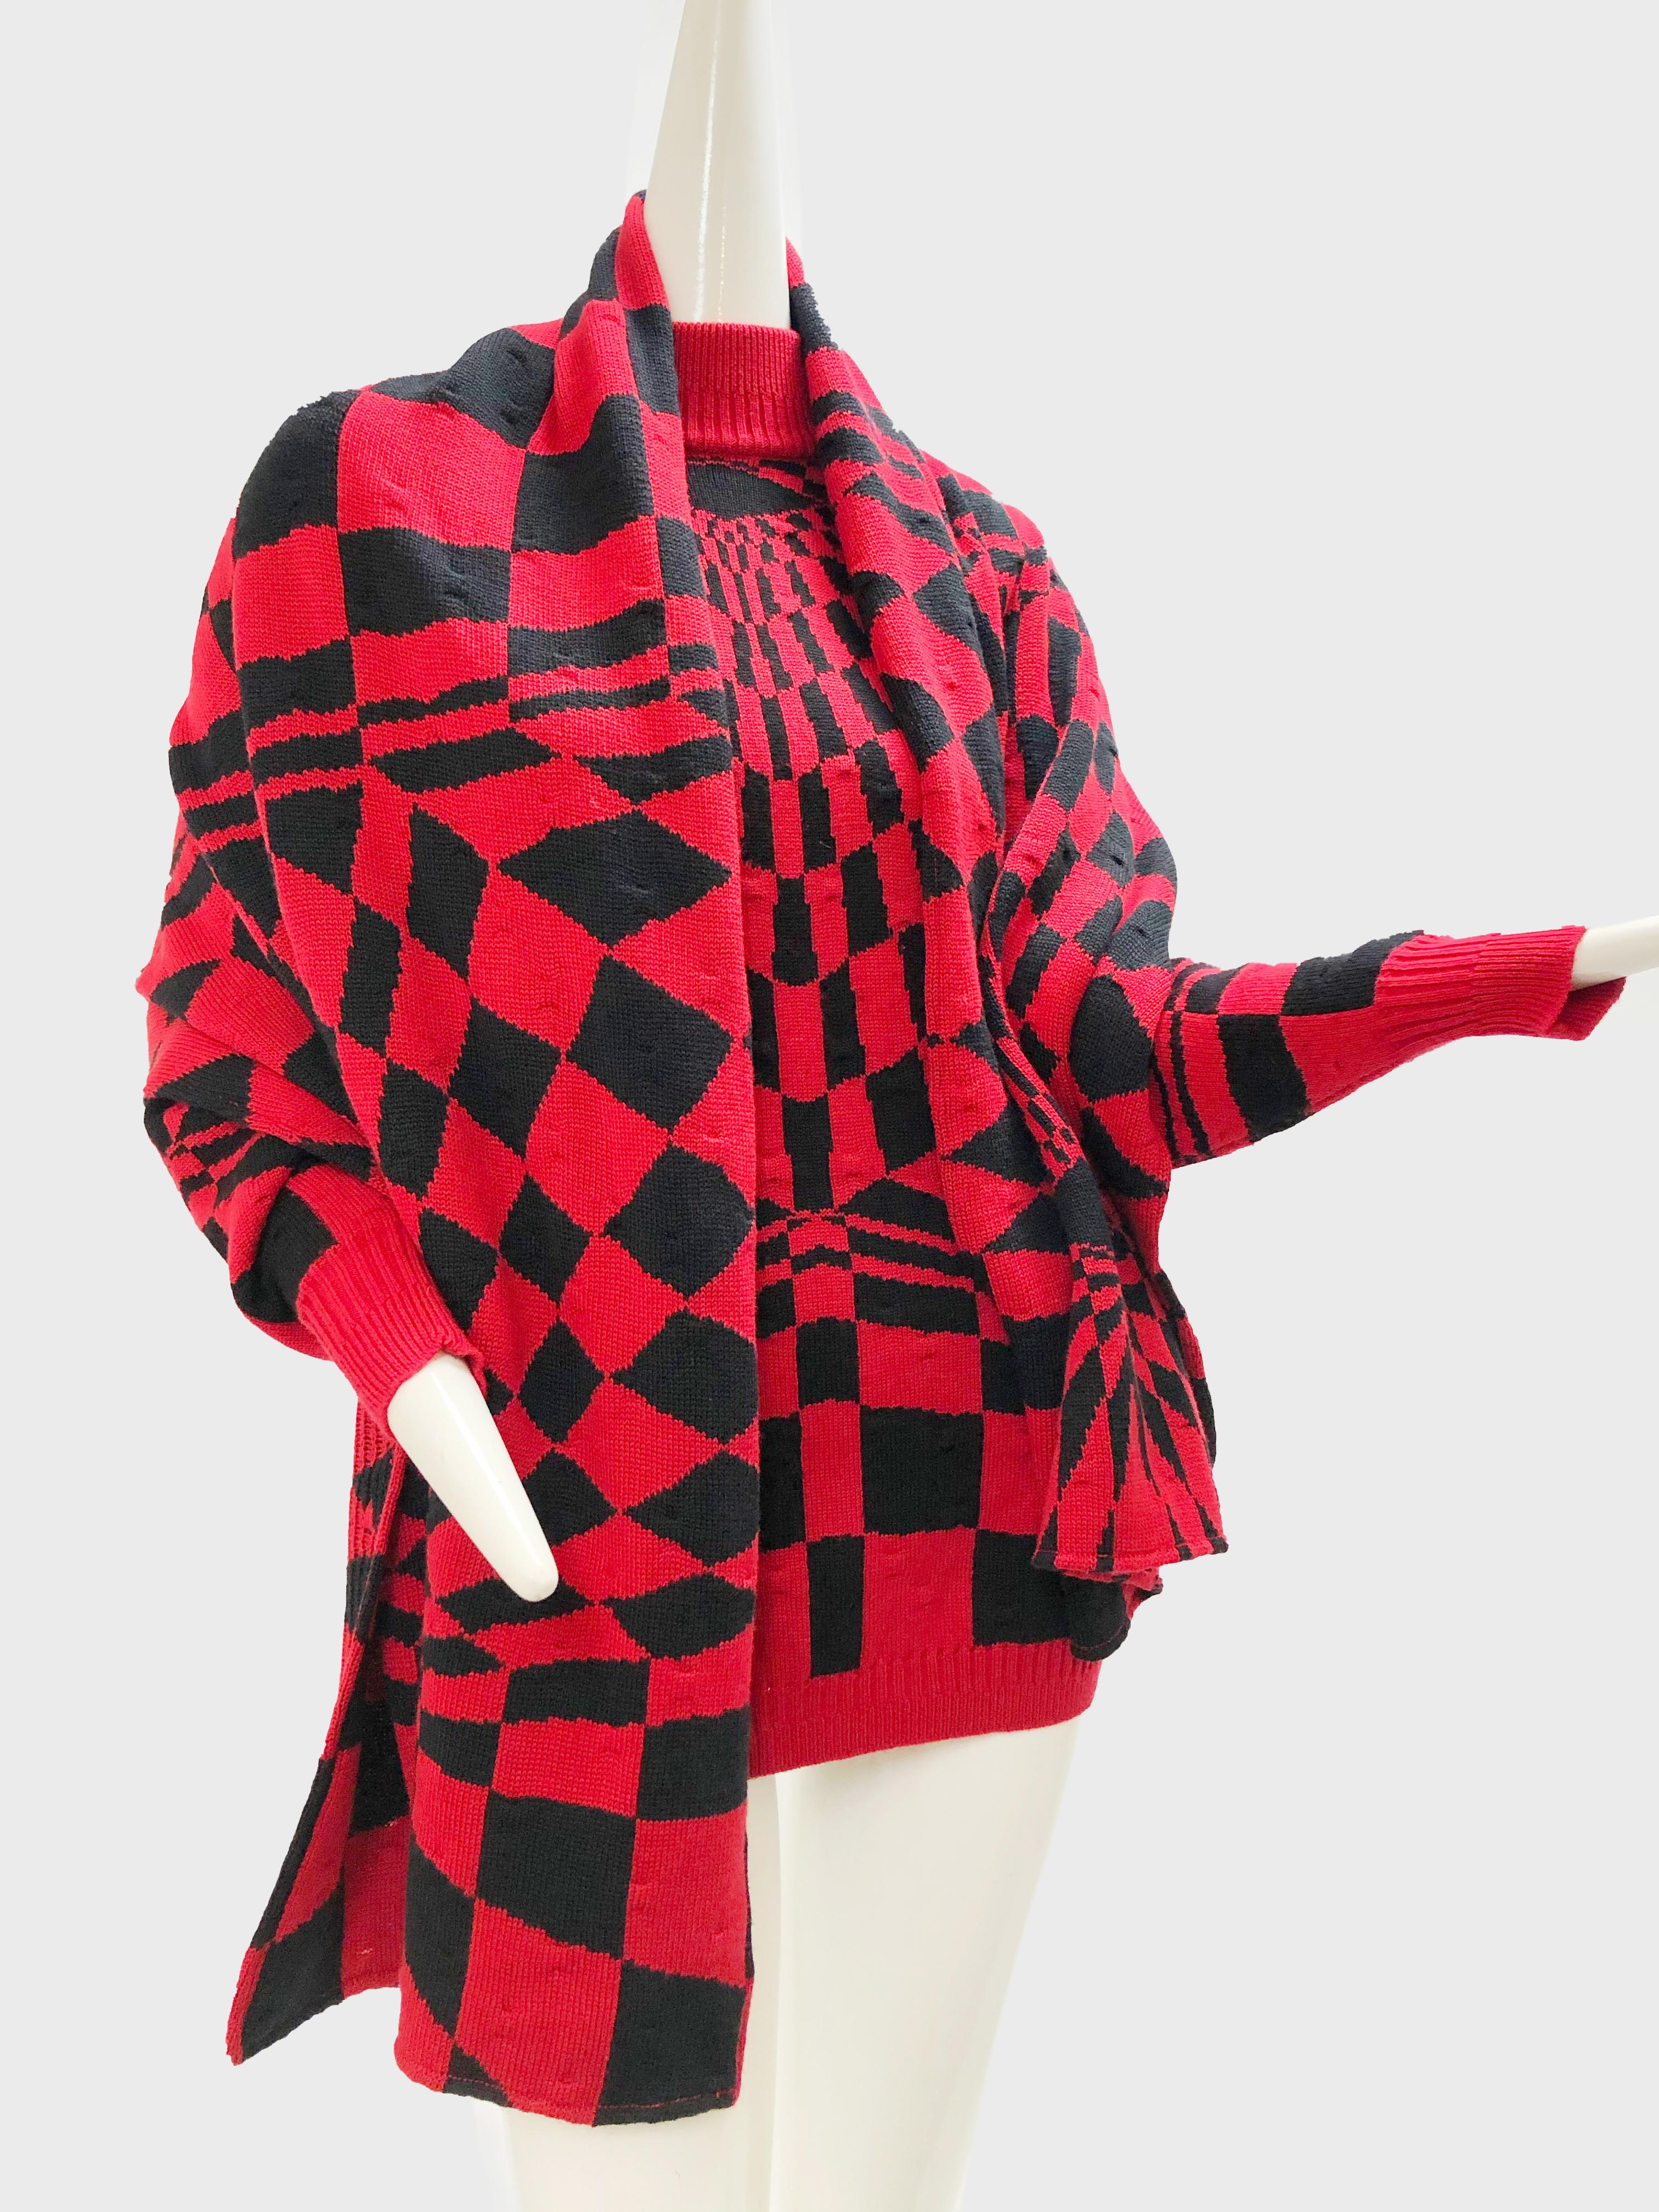 A fabulous 1980s Gianni Versace 3-Piece knit ensemble:   Wavy-textured black knit skirt with a matching sweater and scarf in an undulating red and black checkerboard pattern. Makes a geometric optic art pattern. Fits a US size M/L. On your mark, get